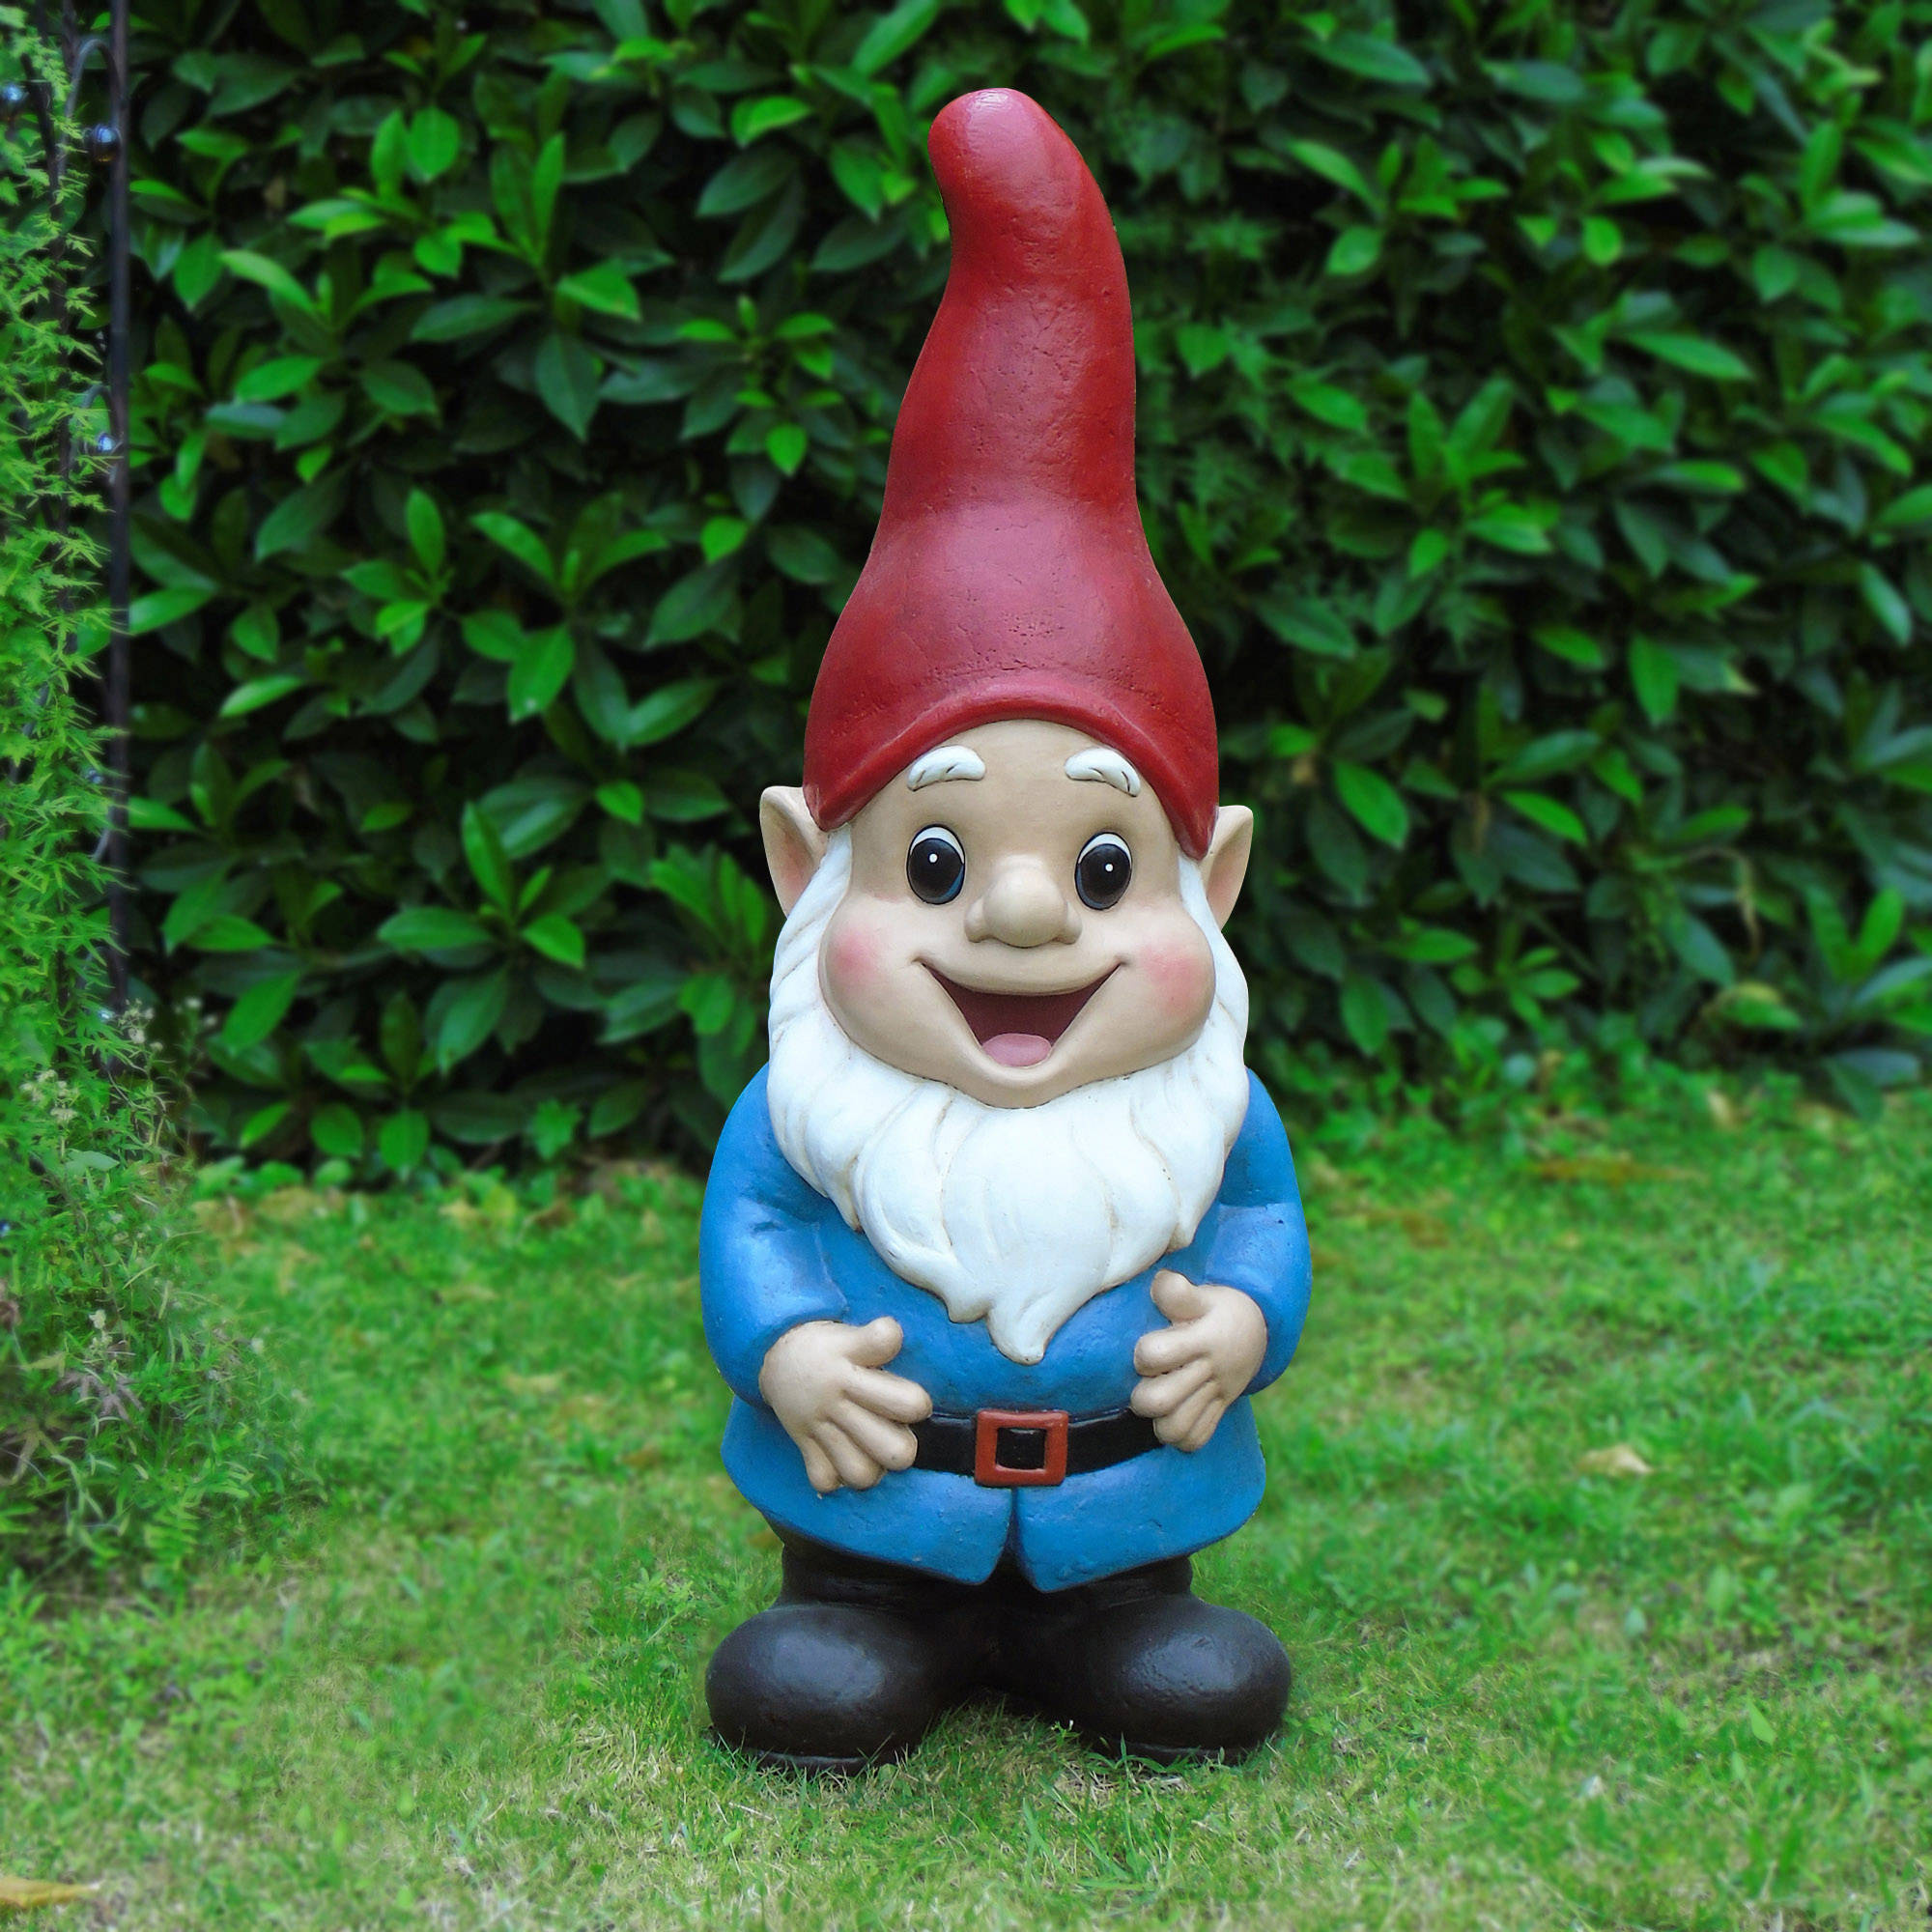 HQ gnome pictures, Gnome wallpapers, Stunning visuals, High-quality images, 2000x2000 HD Handy